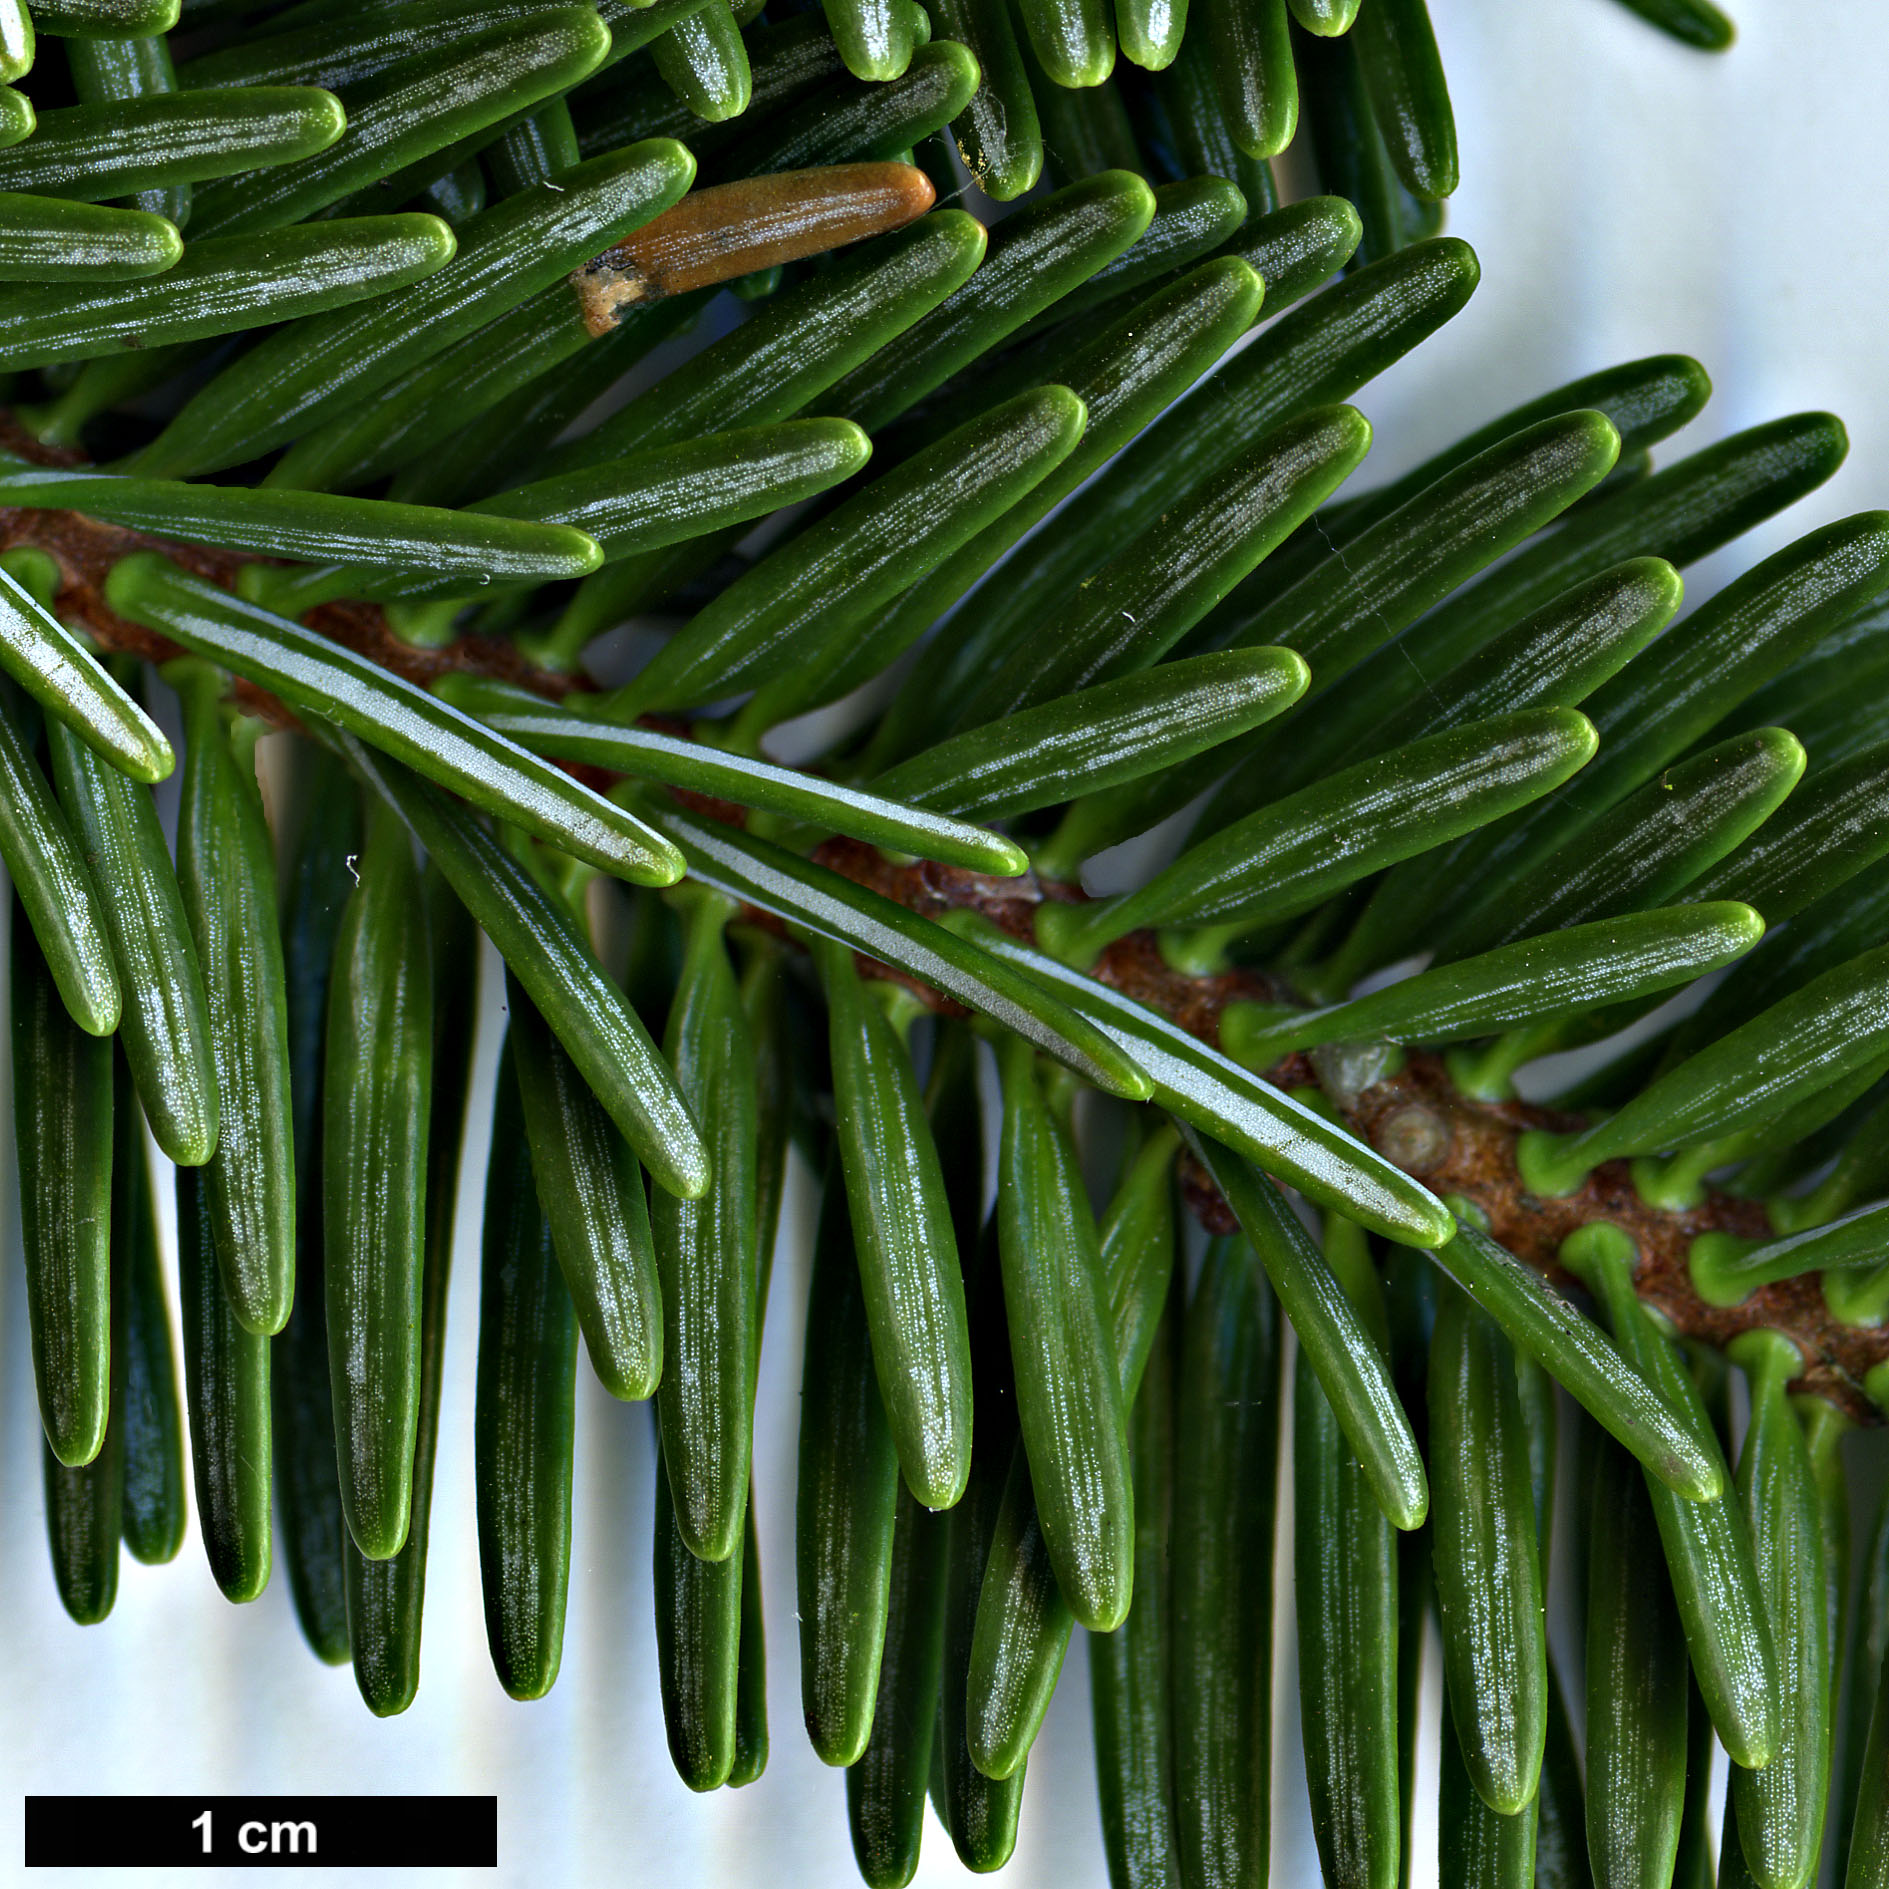 High resolution image: Family: Pinaceae - Genus: Abies - Taxon: ×insignis (A.nordmanniana × A.pinsapo)